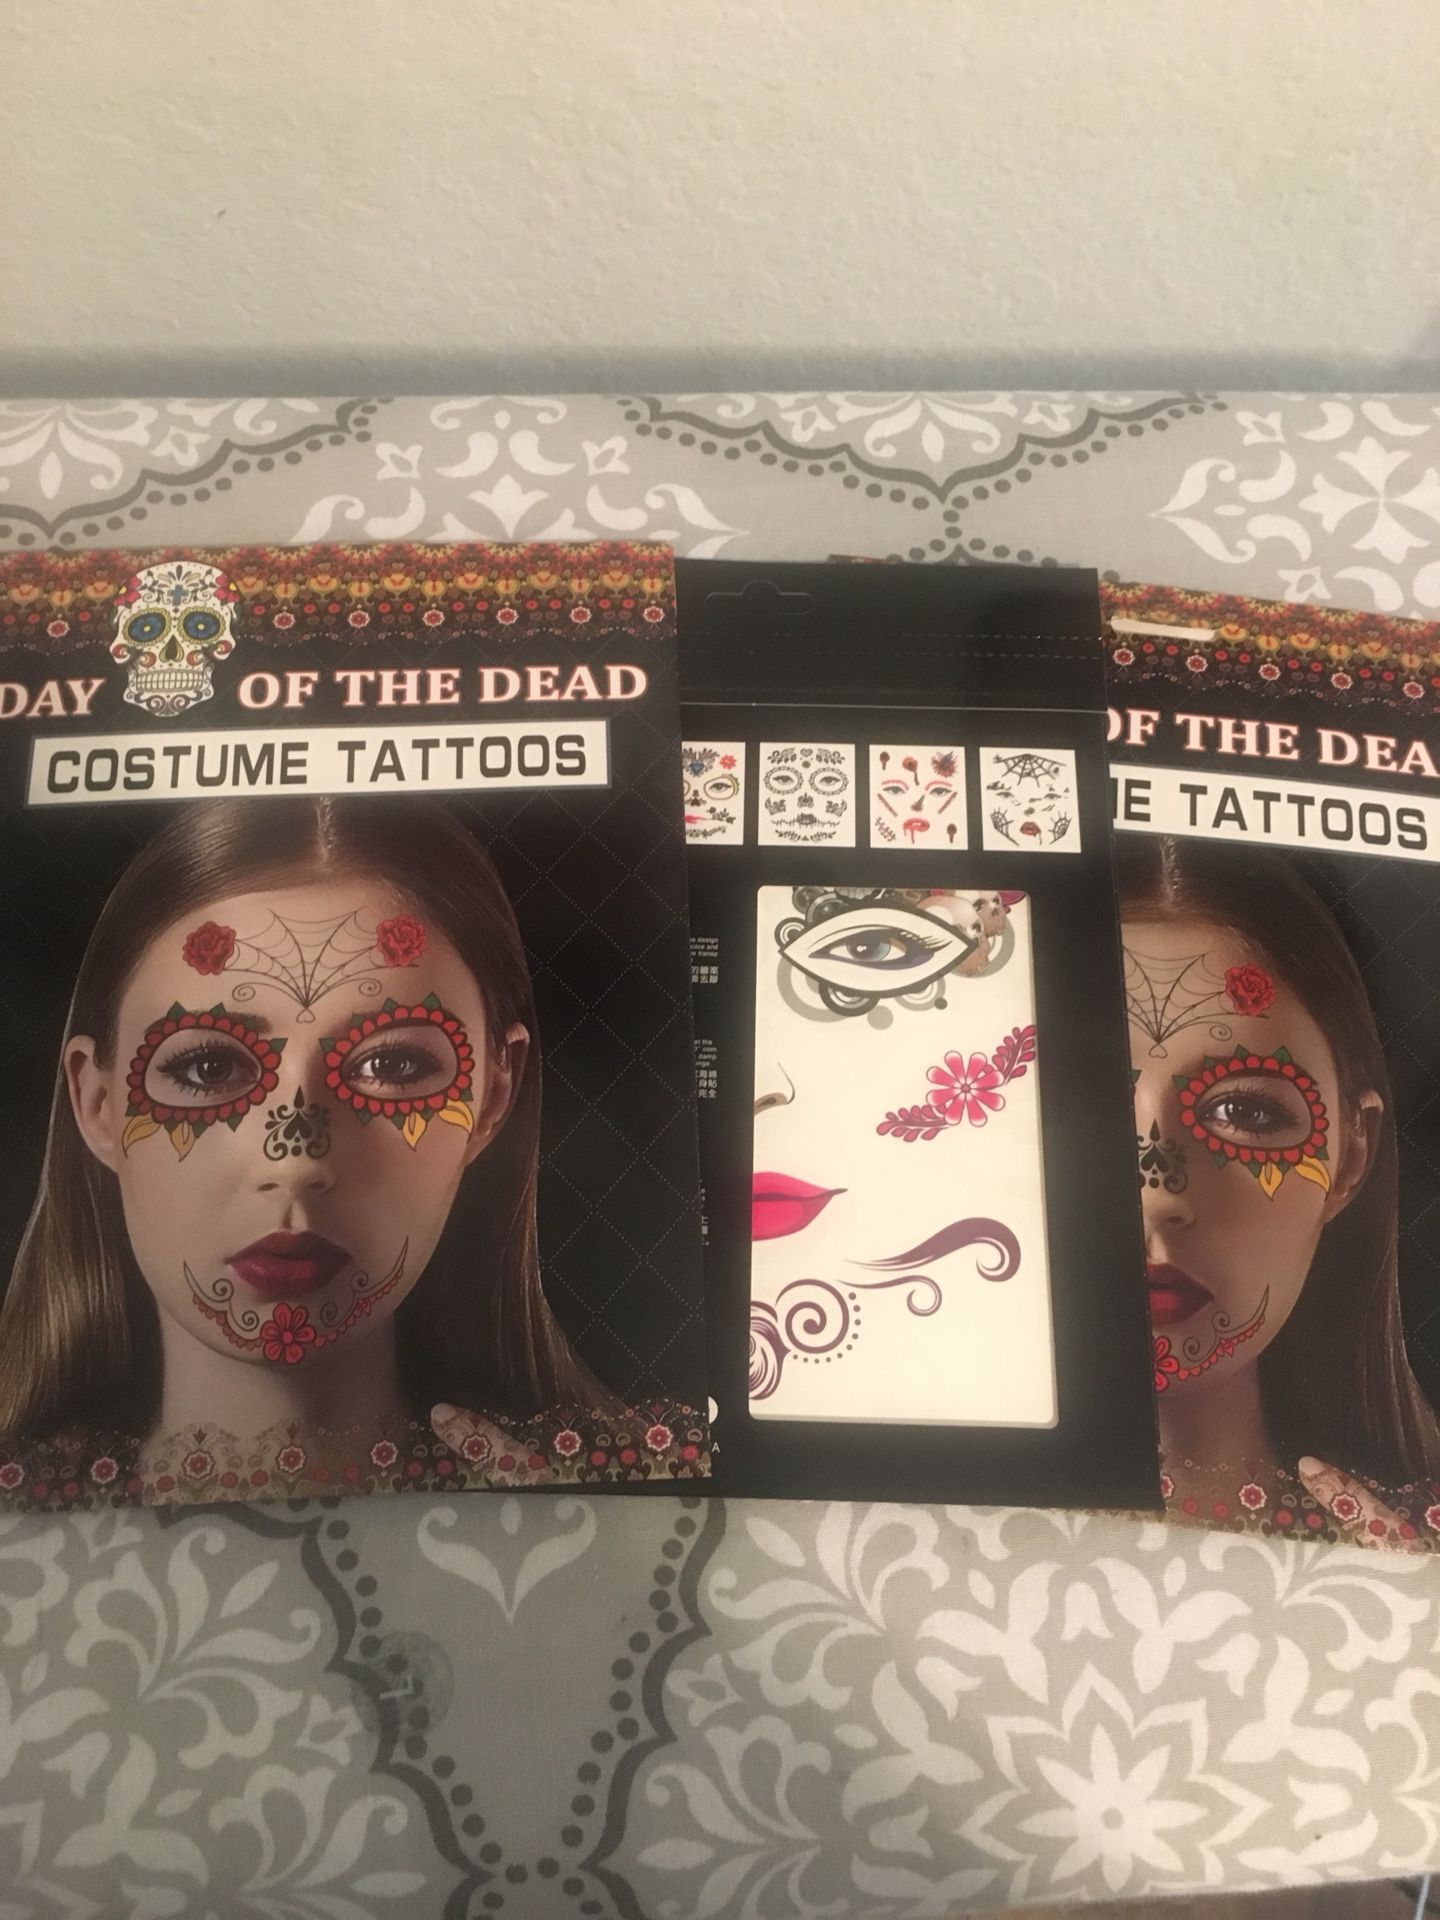 Day of the Dead face tattoos all 3 for $8